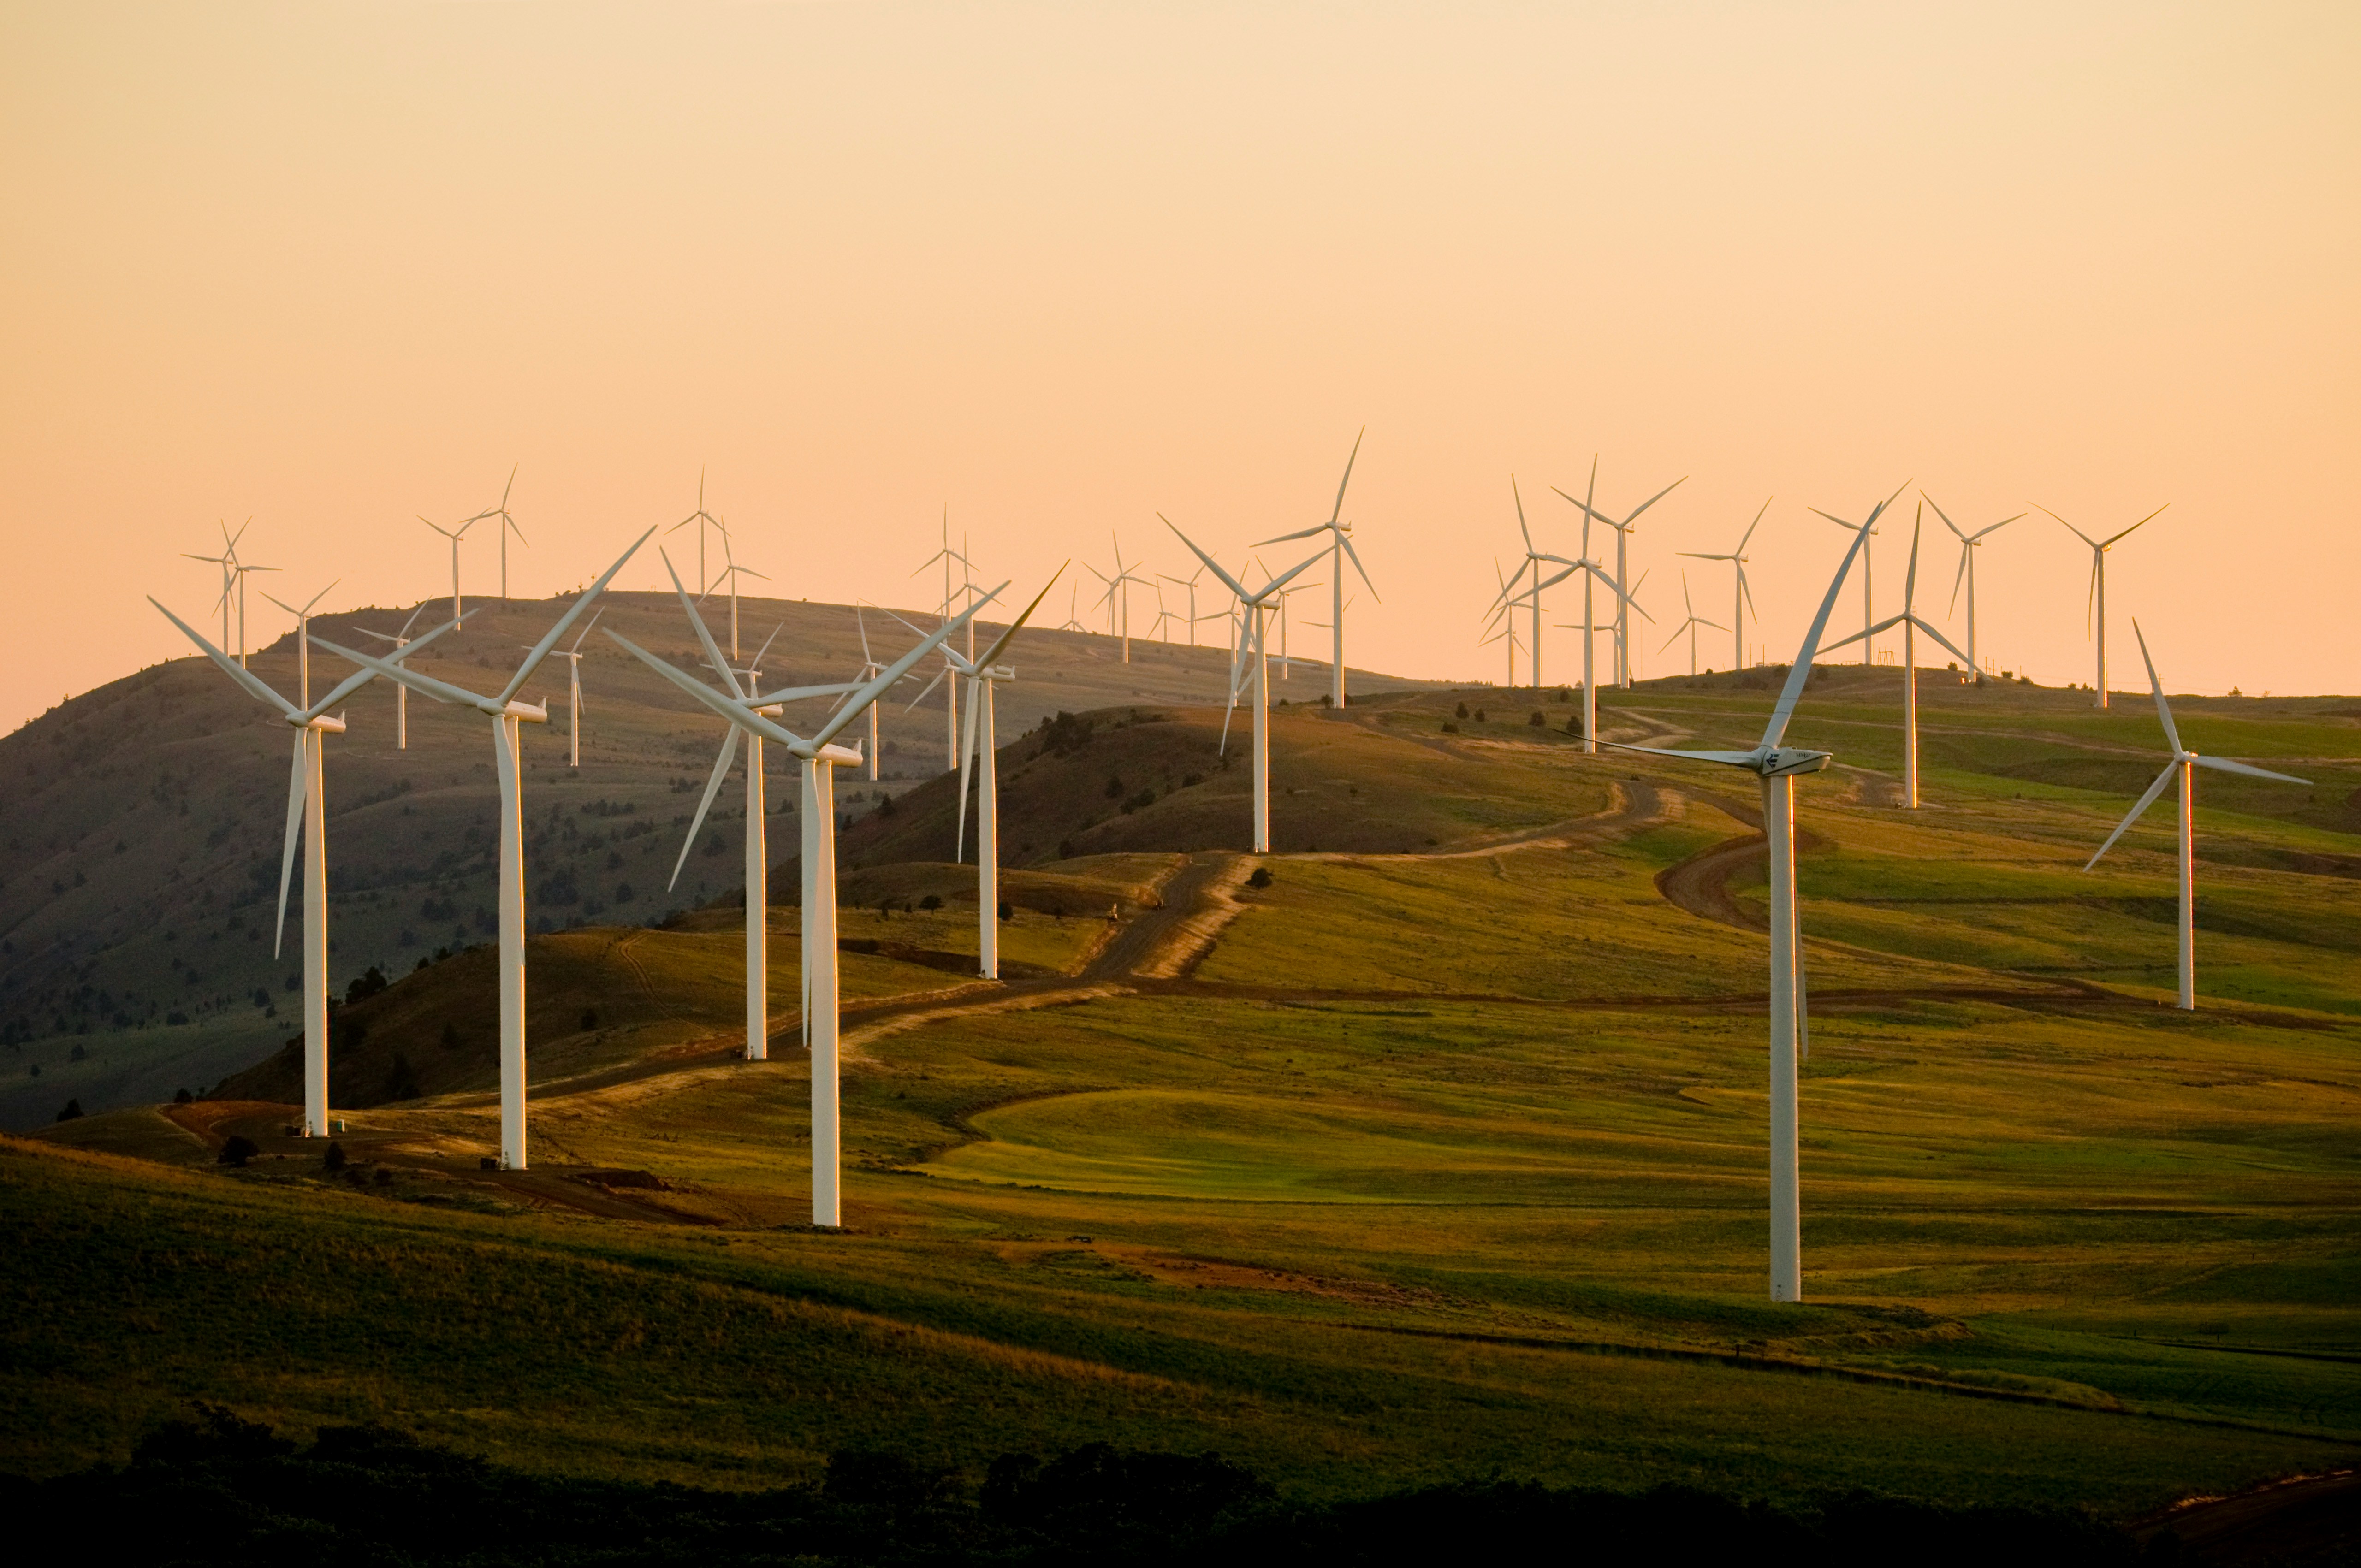 The amount of energy generated from wind and other decarbonised technologies is growing at exponential rates. : Unsplash: American Public Power Association Unsplash Licence